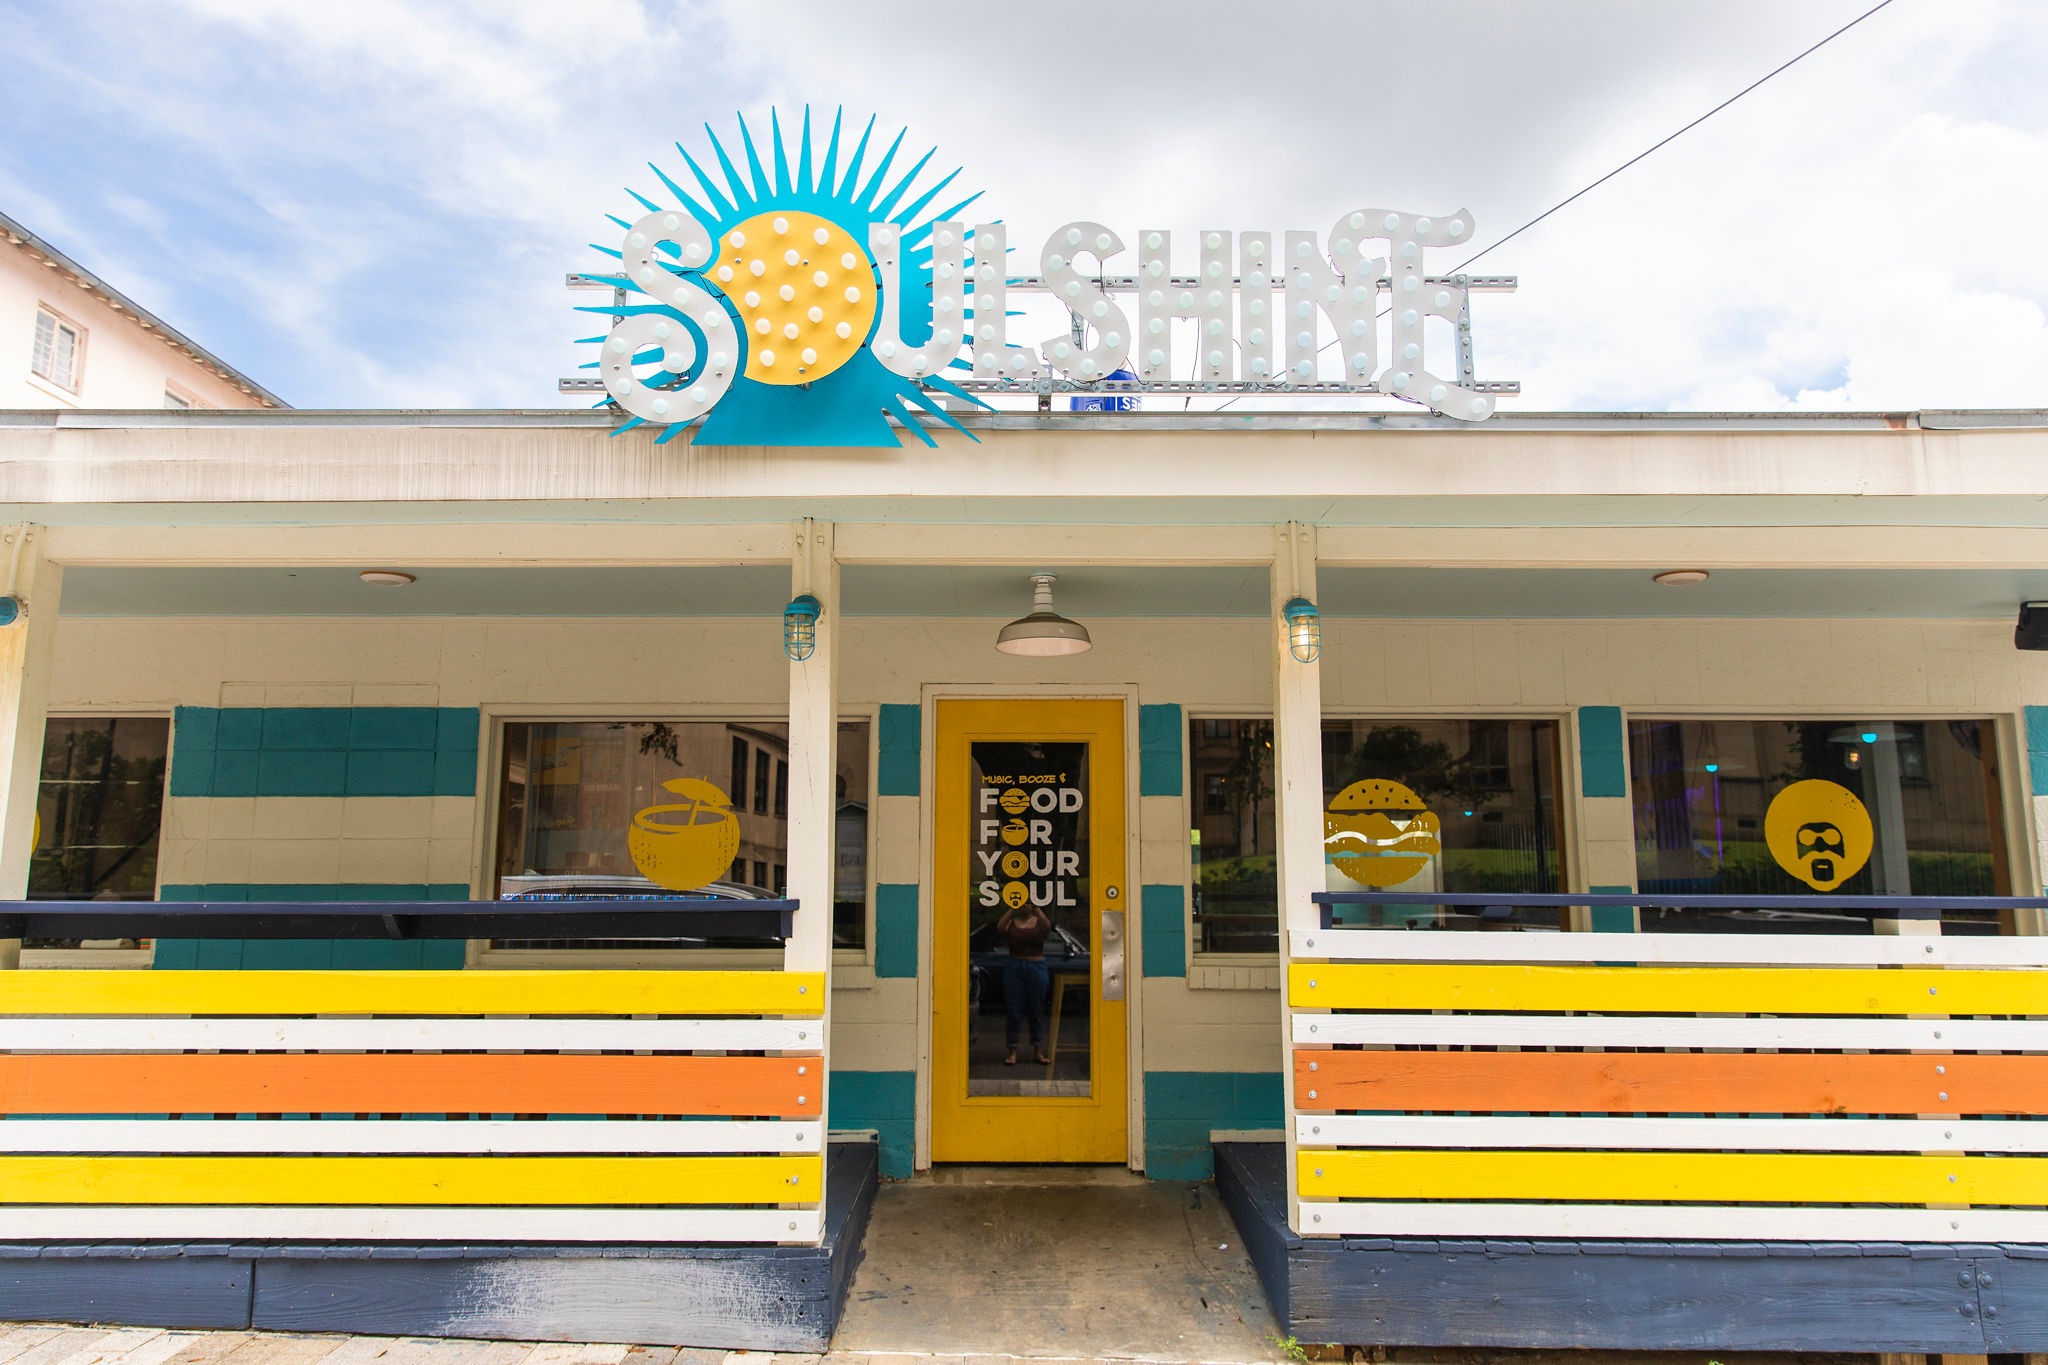 Soulshine Kitchen brings homestyle cooking, atmosphere near LSU